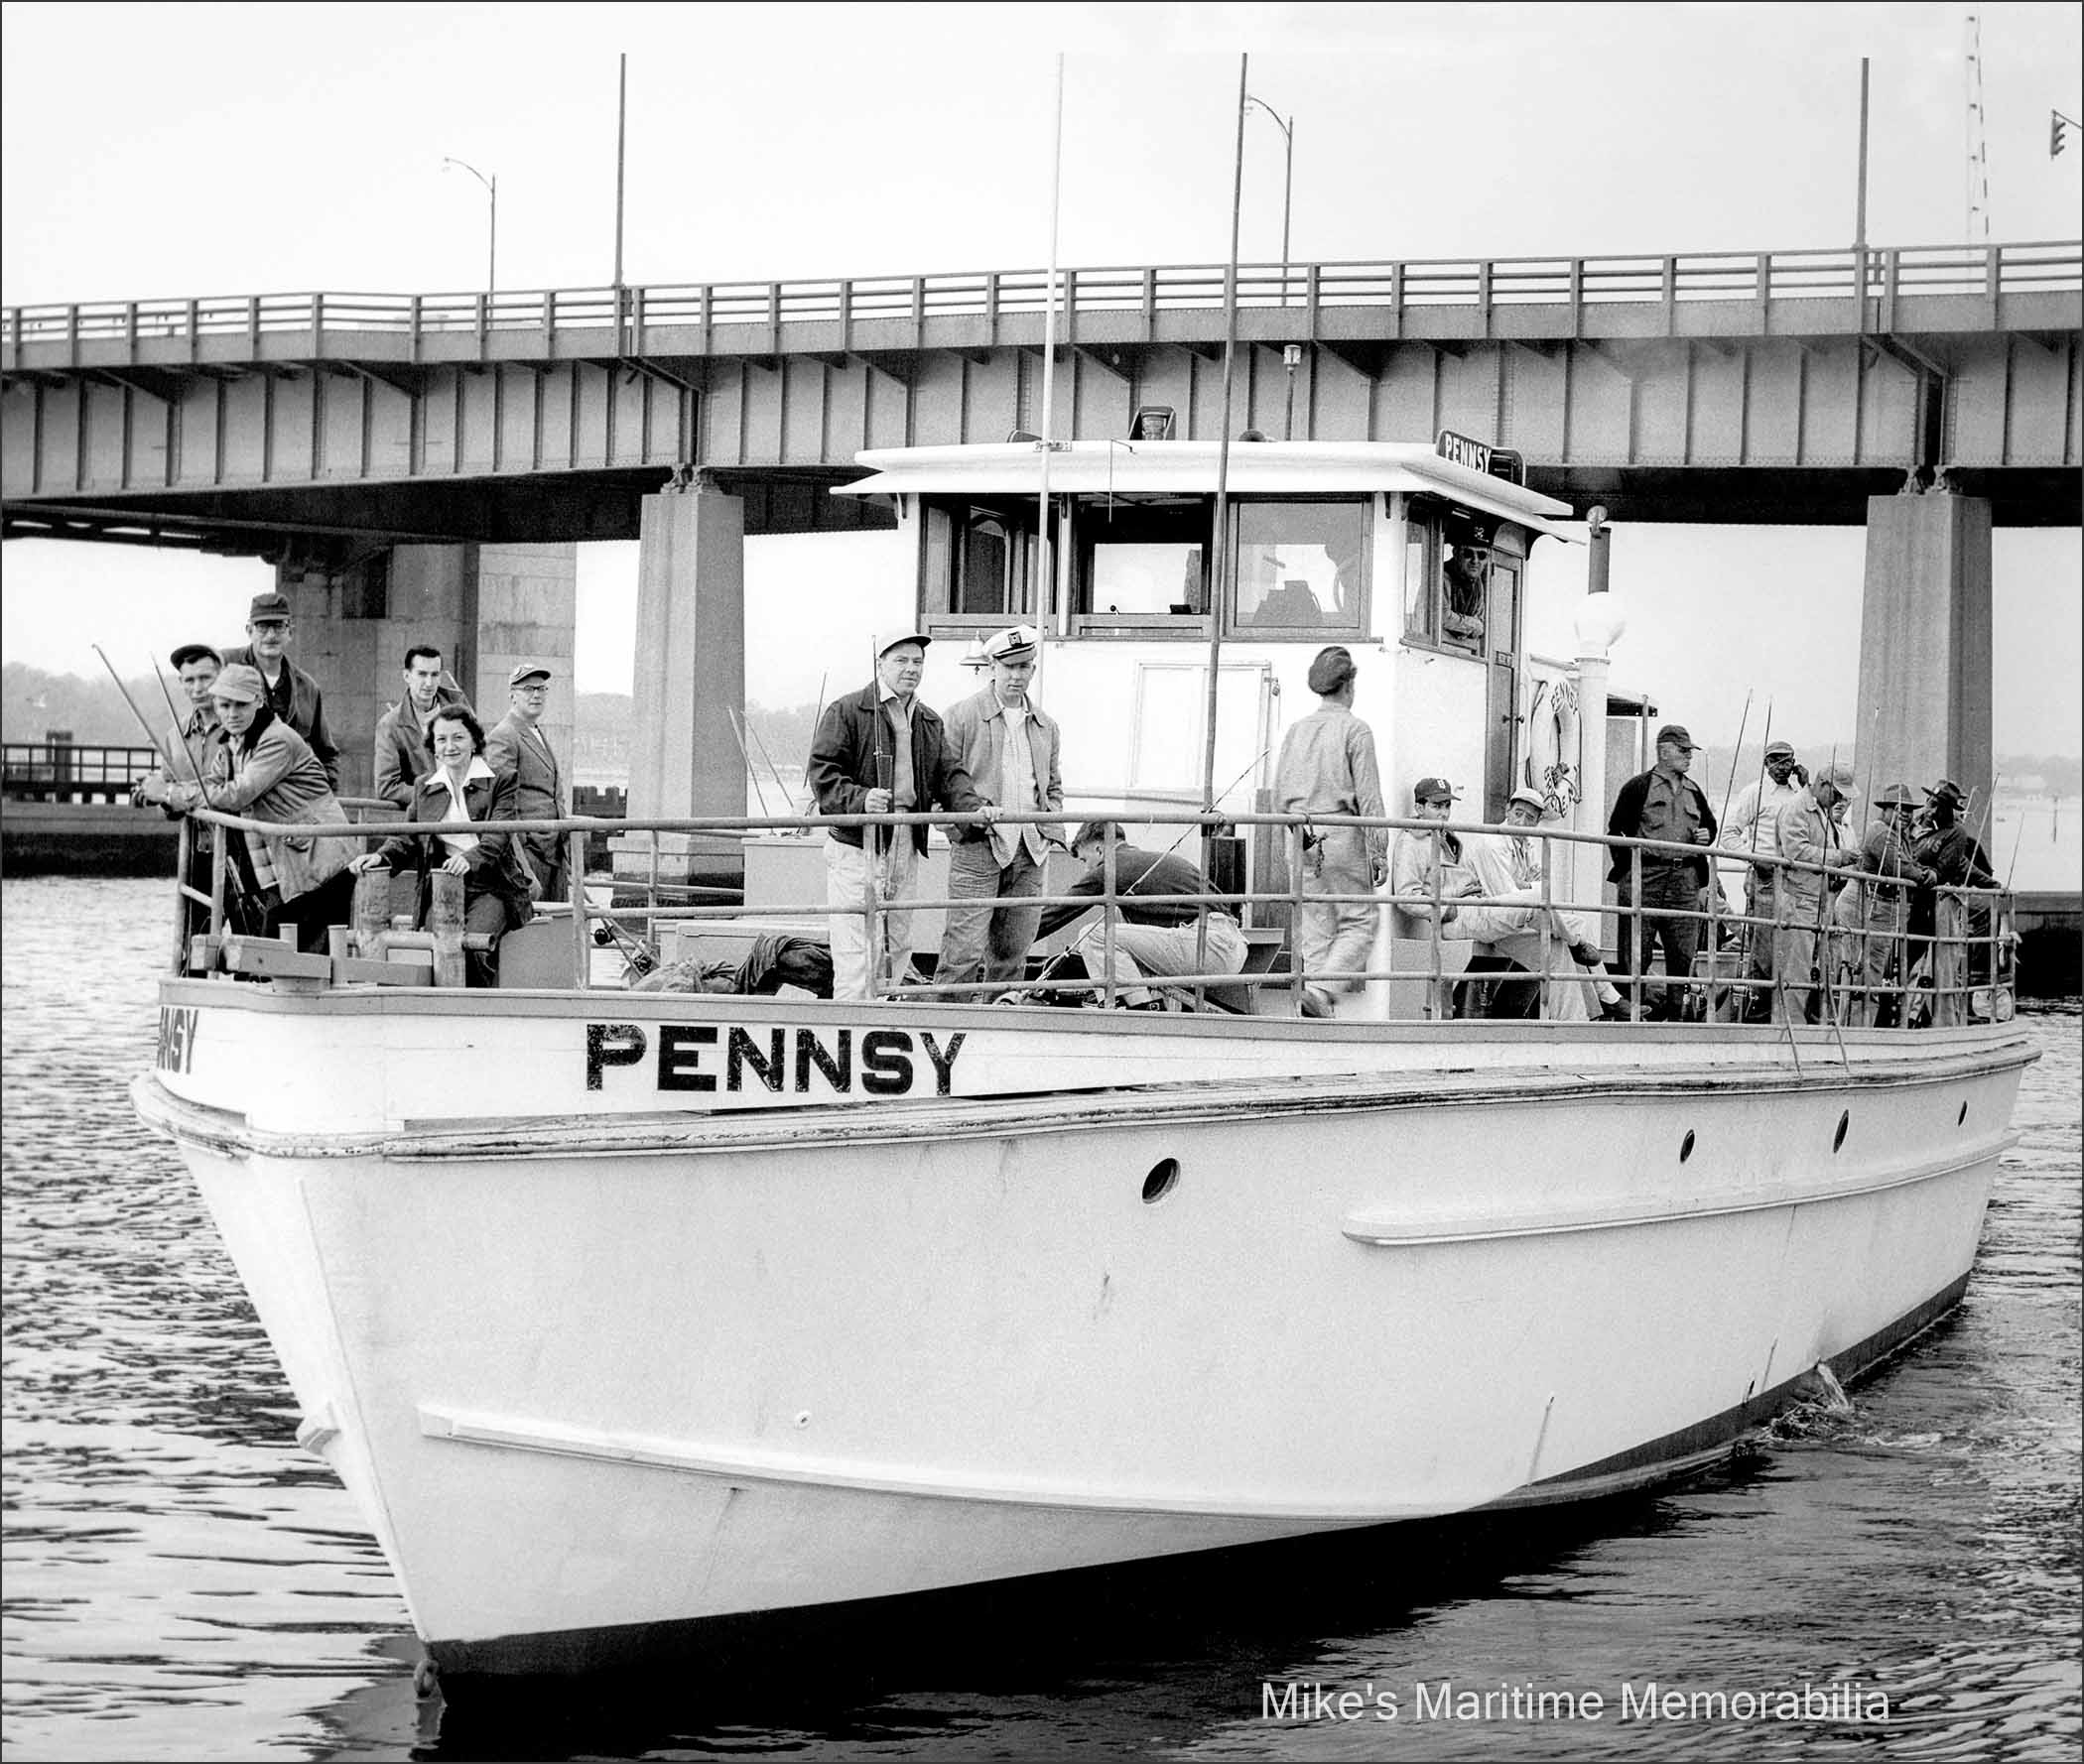 PENNSY, Brielle, NJ – 1956 The "PENNSY" from Brielle, NJ circa 1956. She was owned by the Bogan family and operated by Captain Roy Skillman. The "PENNSY" was a converted World War II PT Boat, the U.S. Navy "PT-547", built in 1943 by the Electric Launch Company (Elco) at Bayonne, NJ. US Coast Guard regulations when she was converted to party boat fishing required vessels longer than 65-feet to have an on-board engineer (along with a captain.) Since she was originally 78 feet in length, the Bogan family shortened her to 64-feet 11-inches to circumvent the requirement. In 1957, Captain Dave Bogan Sr. took over the helm of the "PENNSY". The Bogan family later sold her and she became Captain Al Wirth's "FALCON" from Atlantic Highlands, NJ. She last sailed as Joe Stanislawczyk's "FALCON" from Highlands, NJ and then was stored at a Staten Island, NY boatyard for a few years and was finally dismantled in 1991. The photo is courtesy of Captain Dave Bogan Sr.